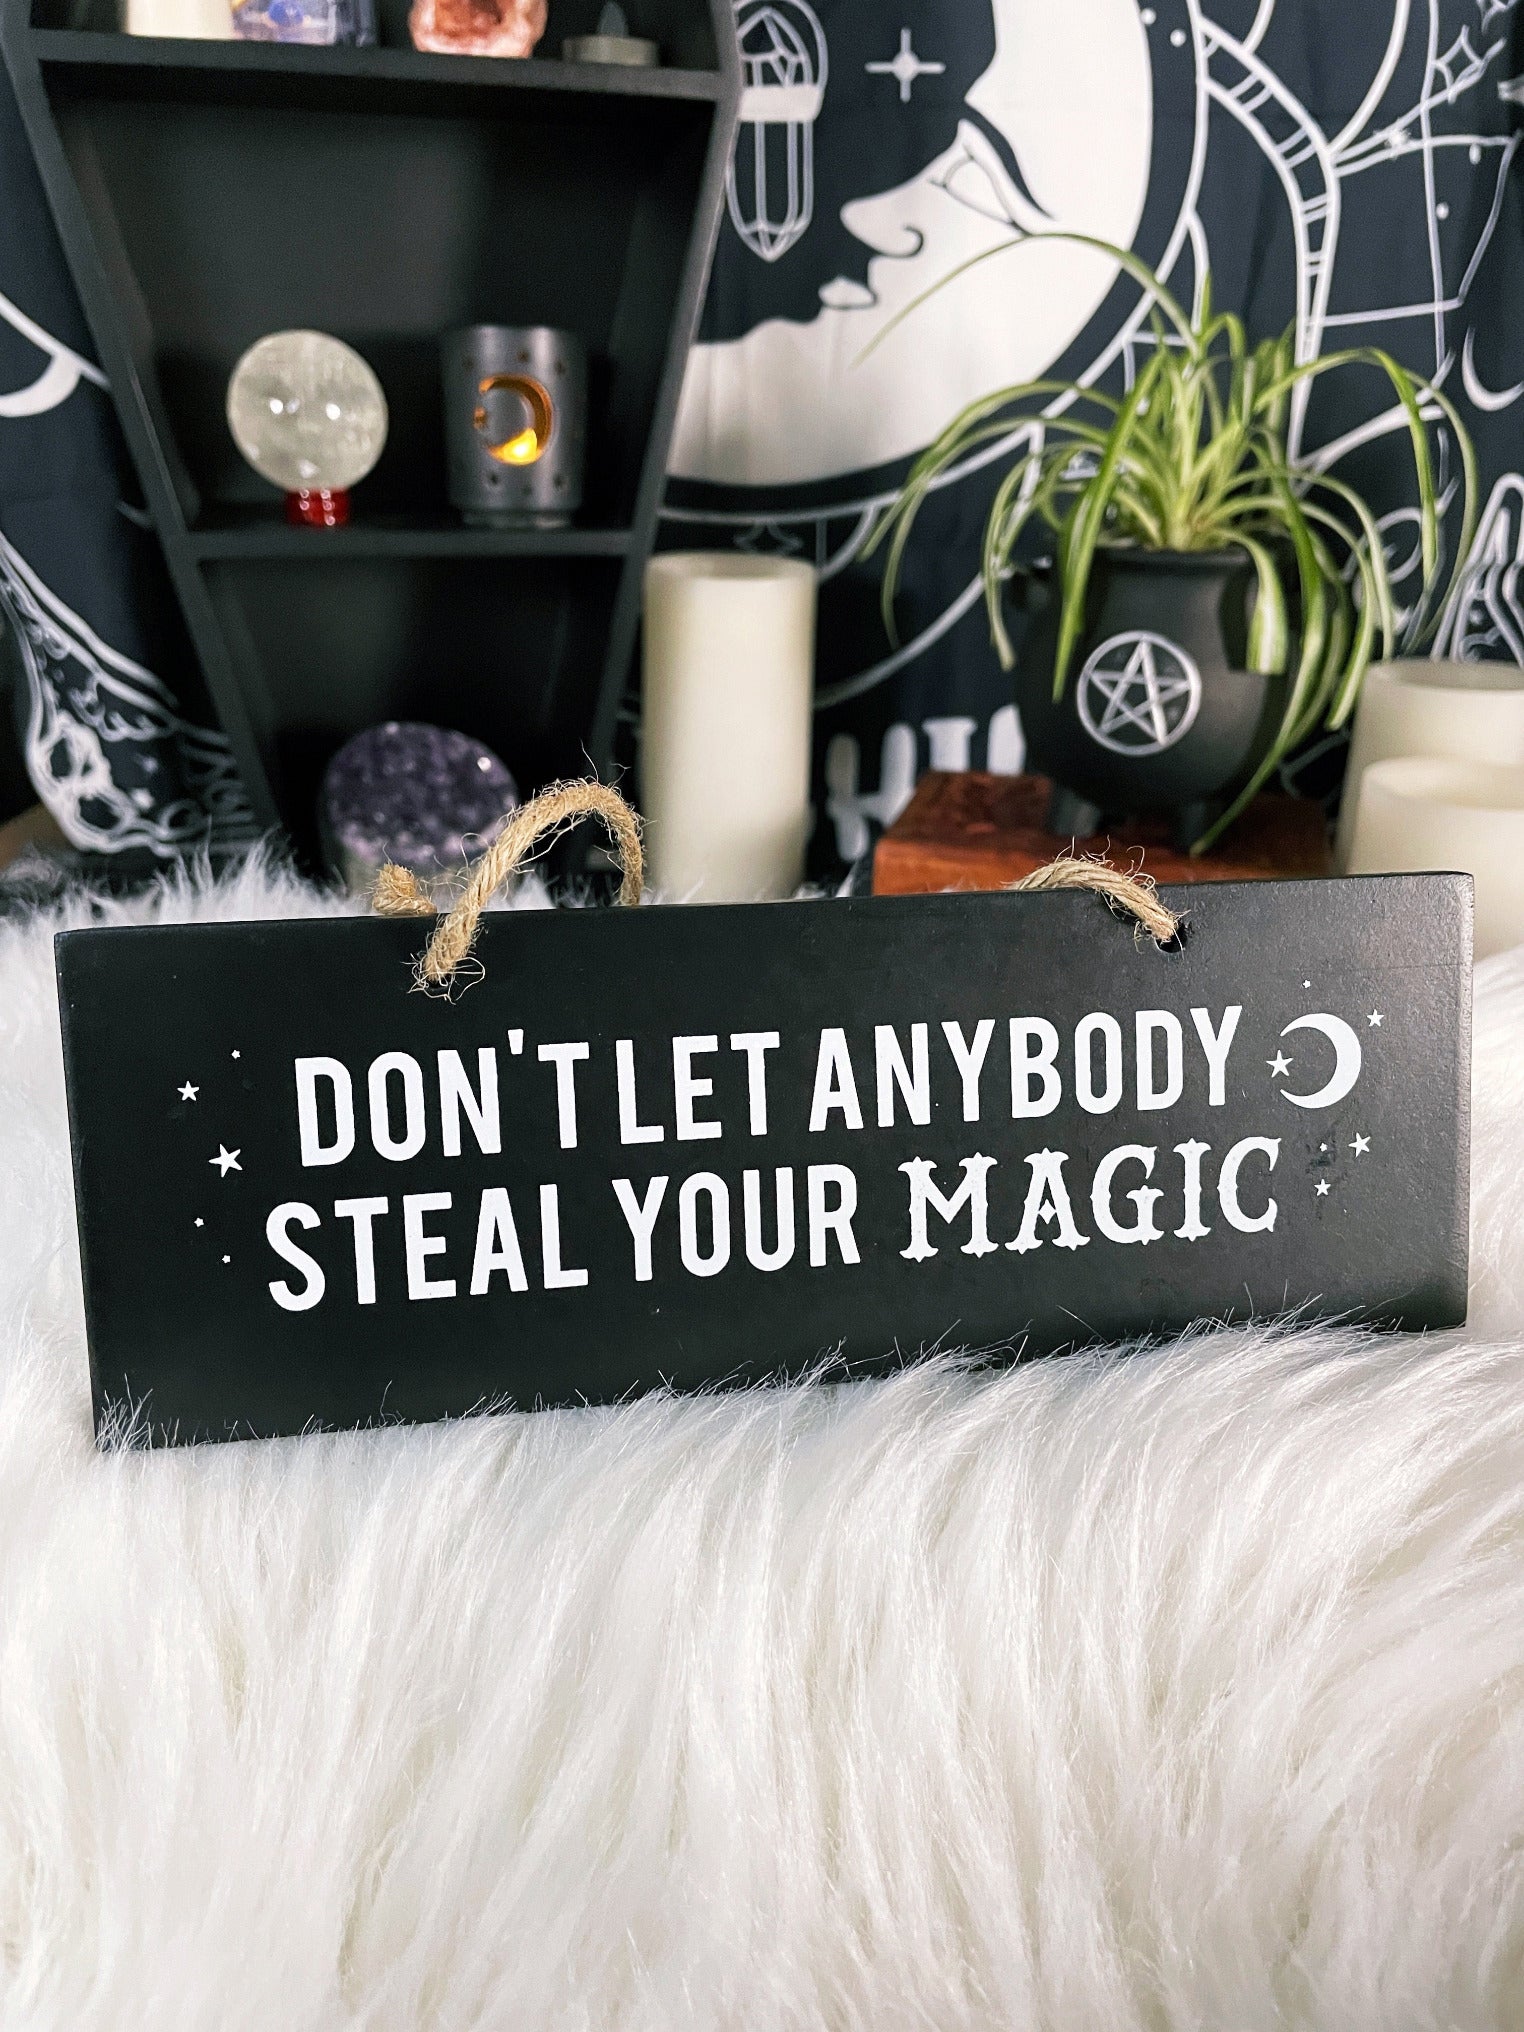 An image of a black sign with white letters that reads "Don't Let Anybody Steal Your Magic." The sign is rectangular and has a thick rope hanger attached to it, making it suitable for hanging on a wall or door. 